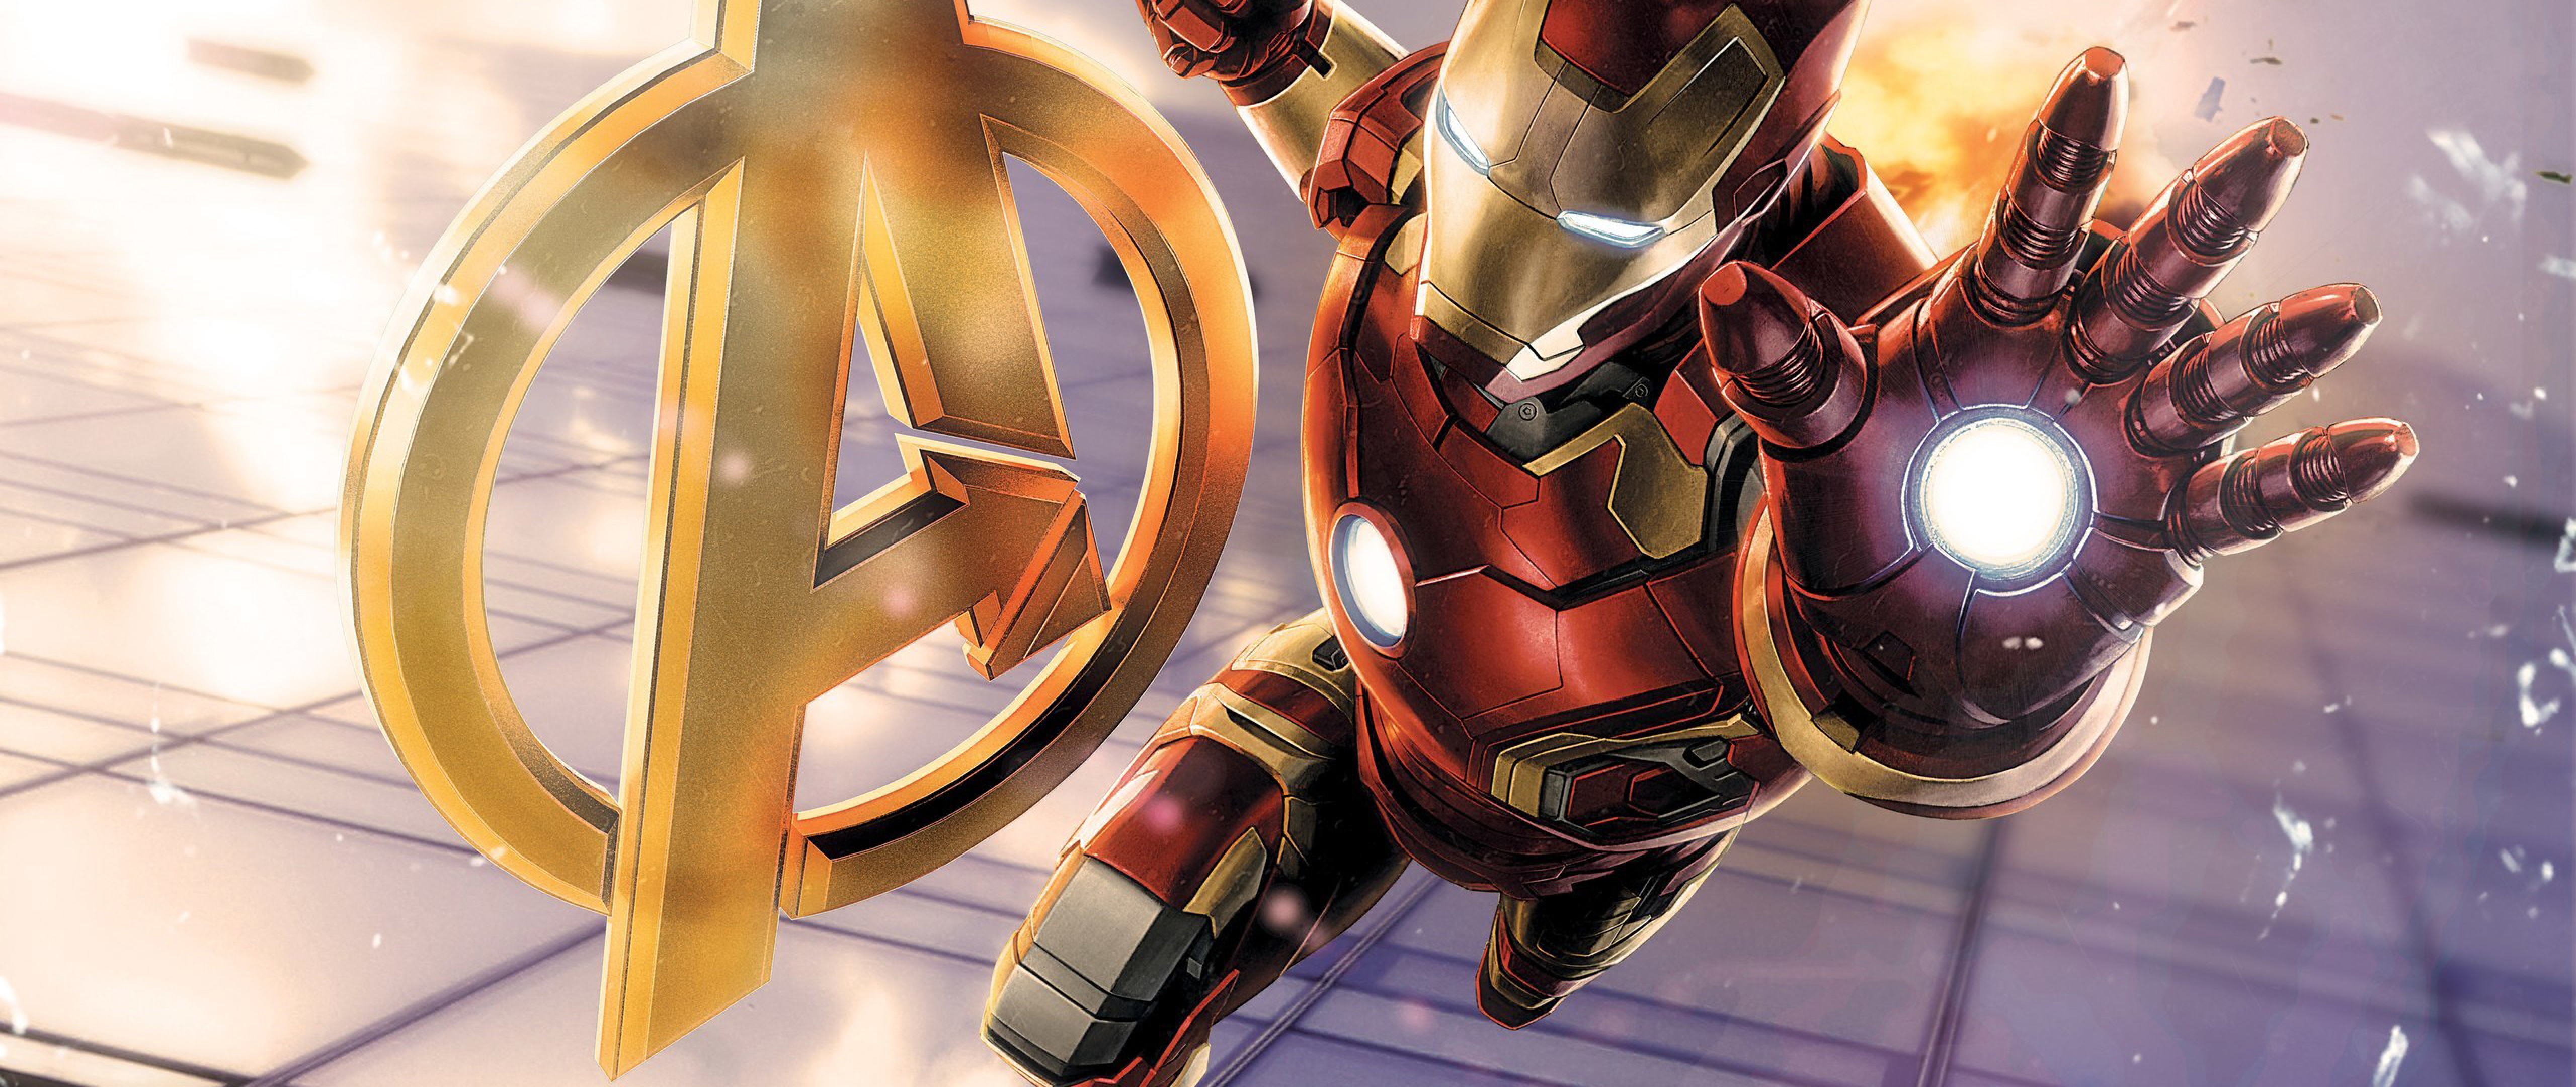 Free Download Iron Man Hd Wallpaper for Desktop and Mobiles 4K Ultra HD